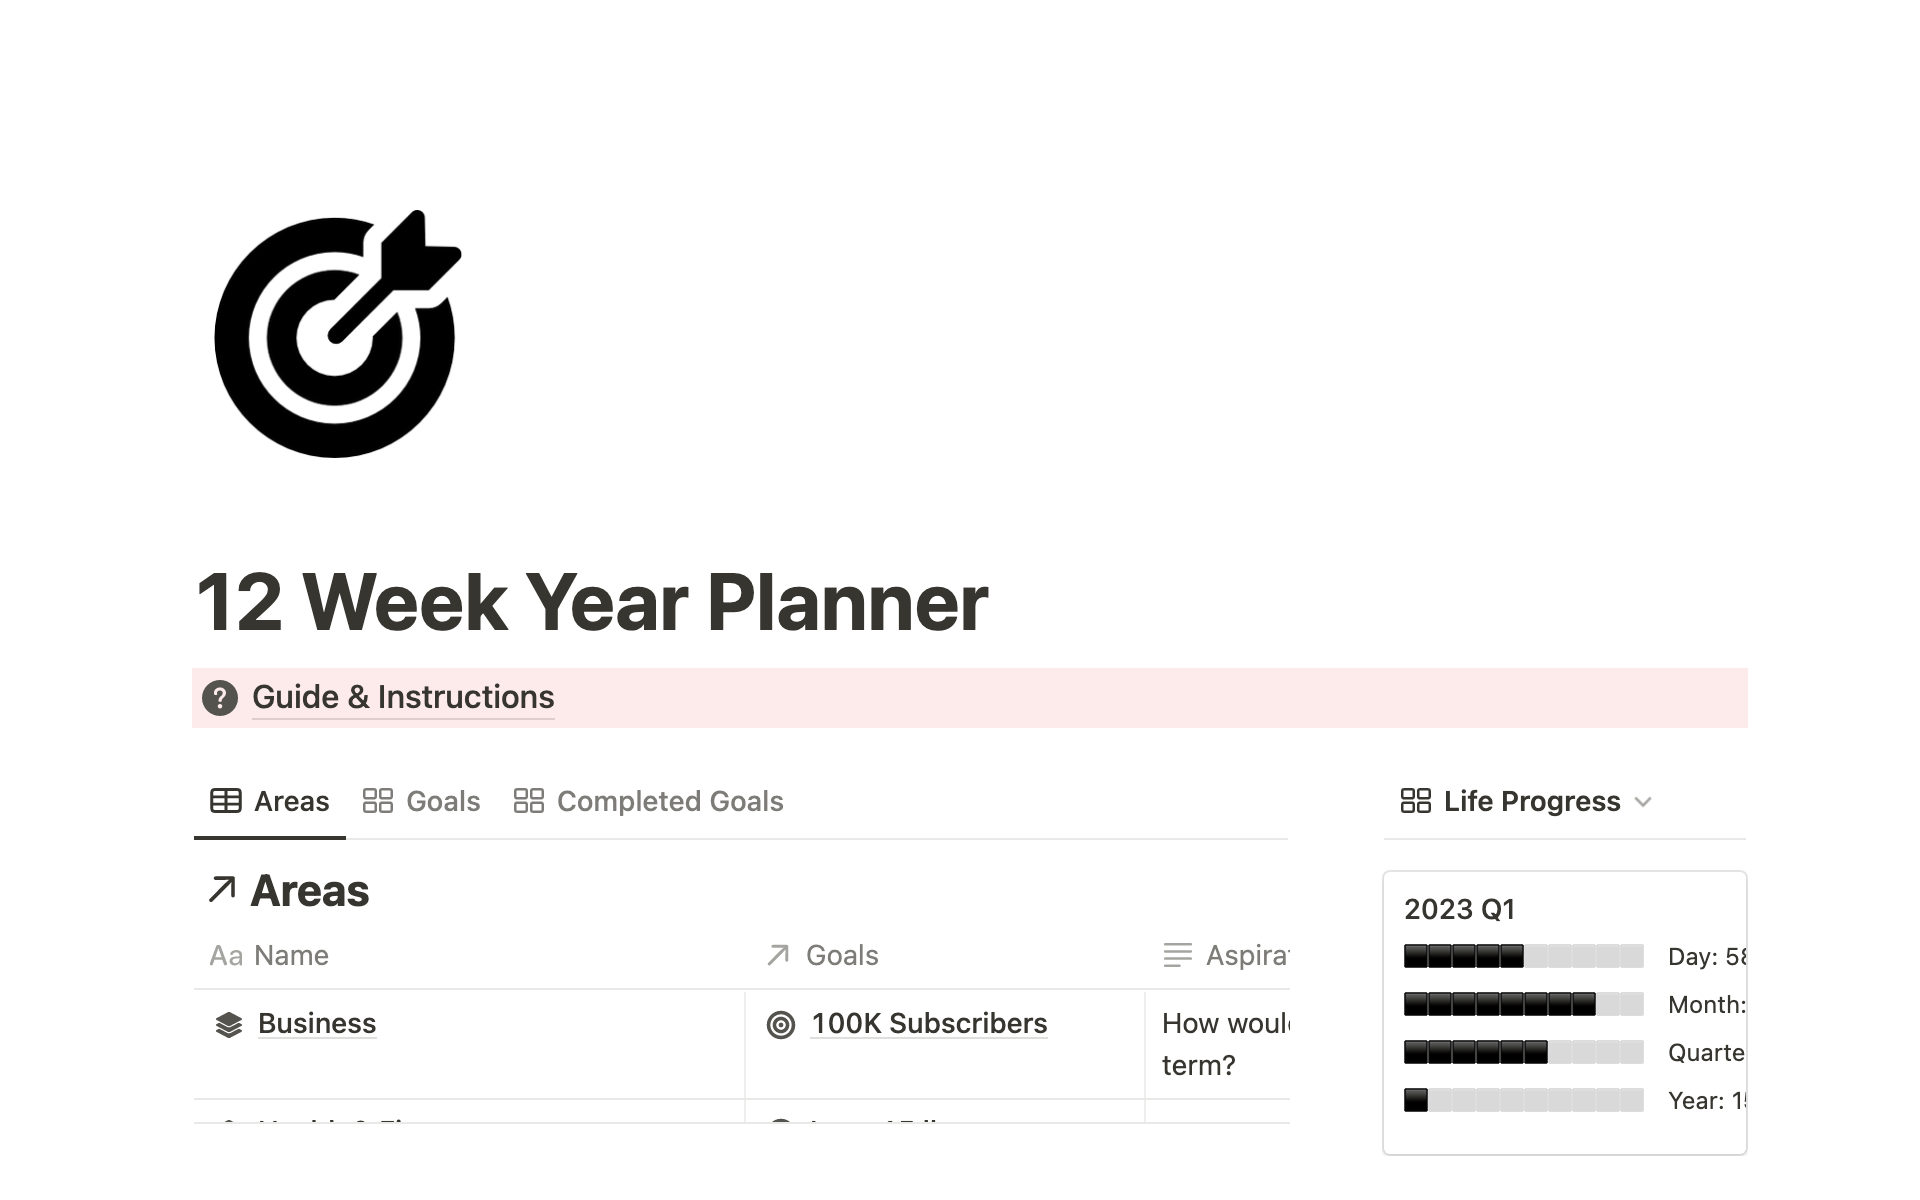 The 12 Week Year is a simple, effective way to set and achieve goals. This template provides a way to plan your year in 12 weeks, with space to set goals and track progress.